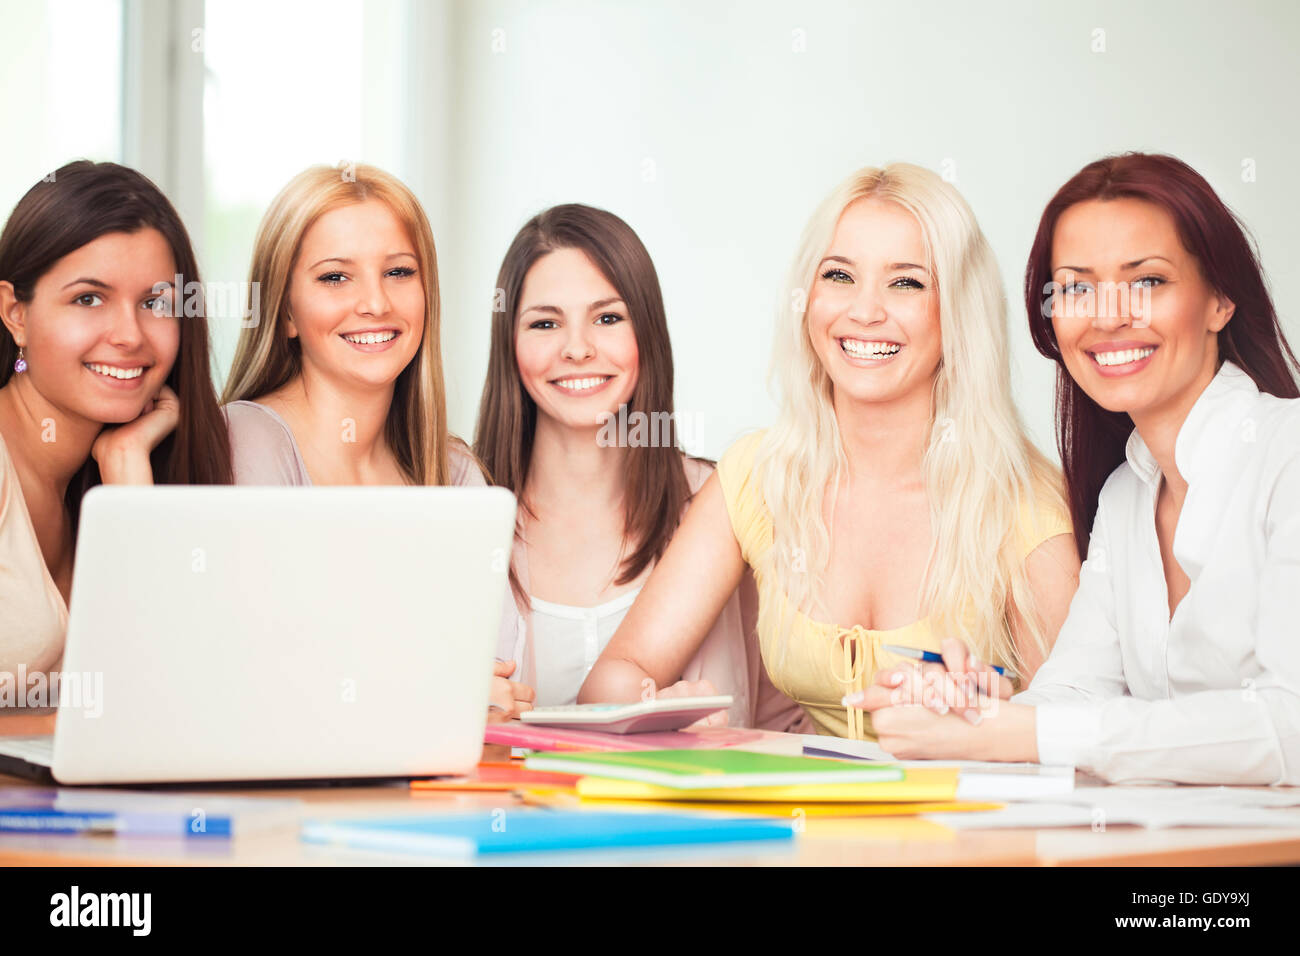 Group of student girls studying with their professor and smiling and looking at the camera. Stock Photo